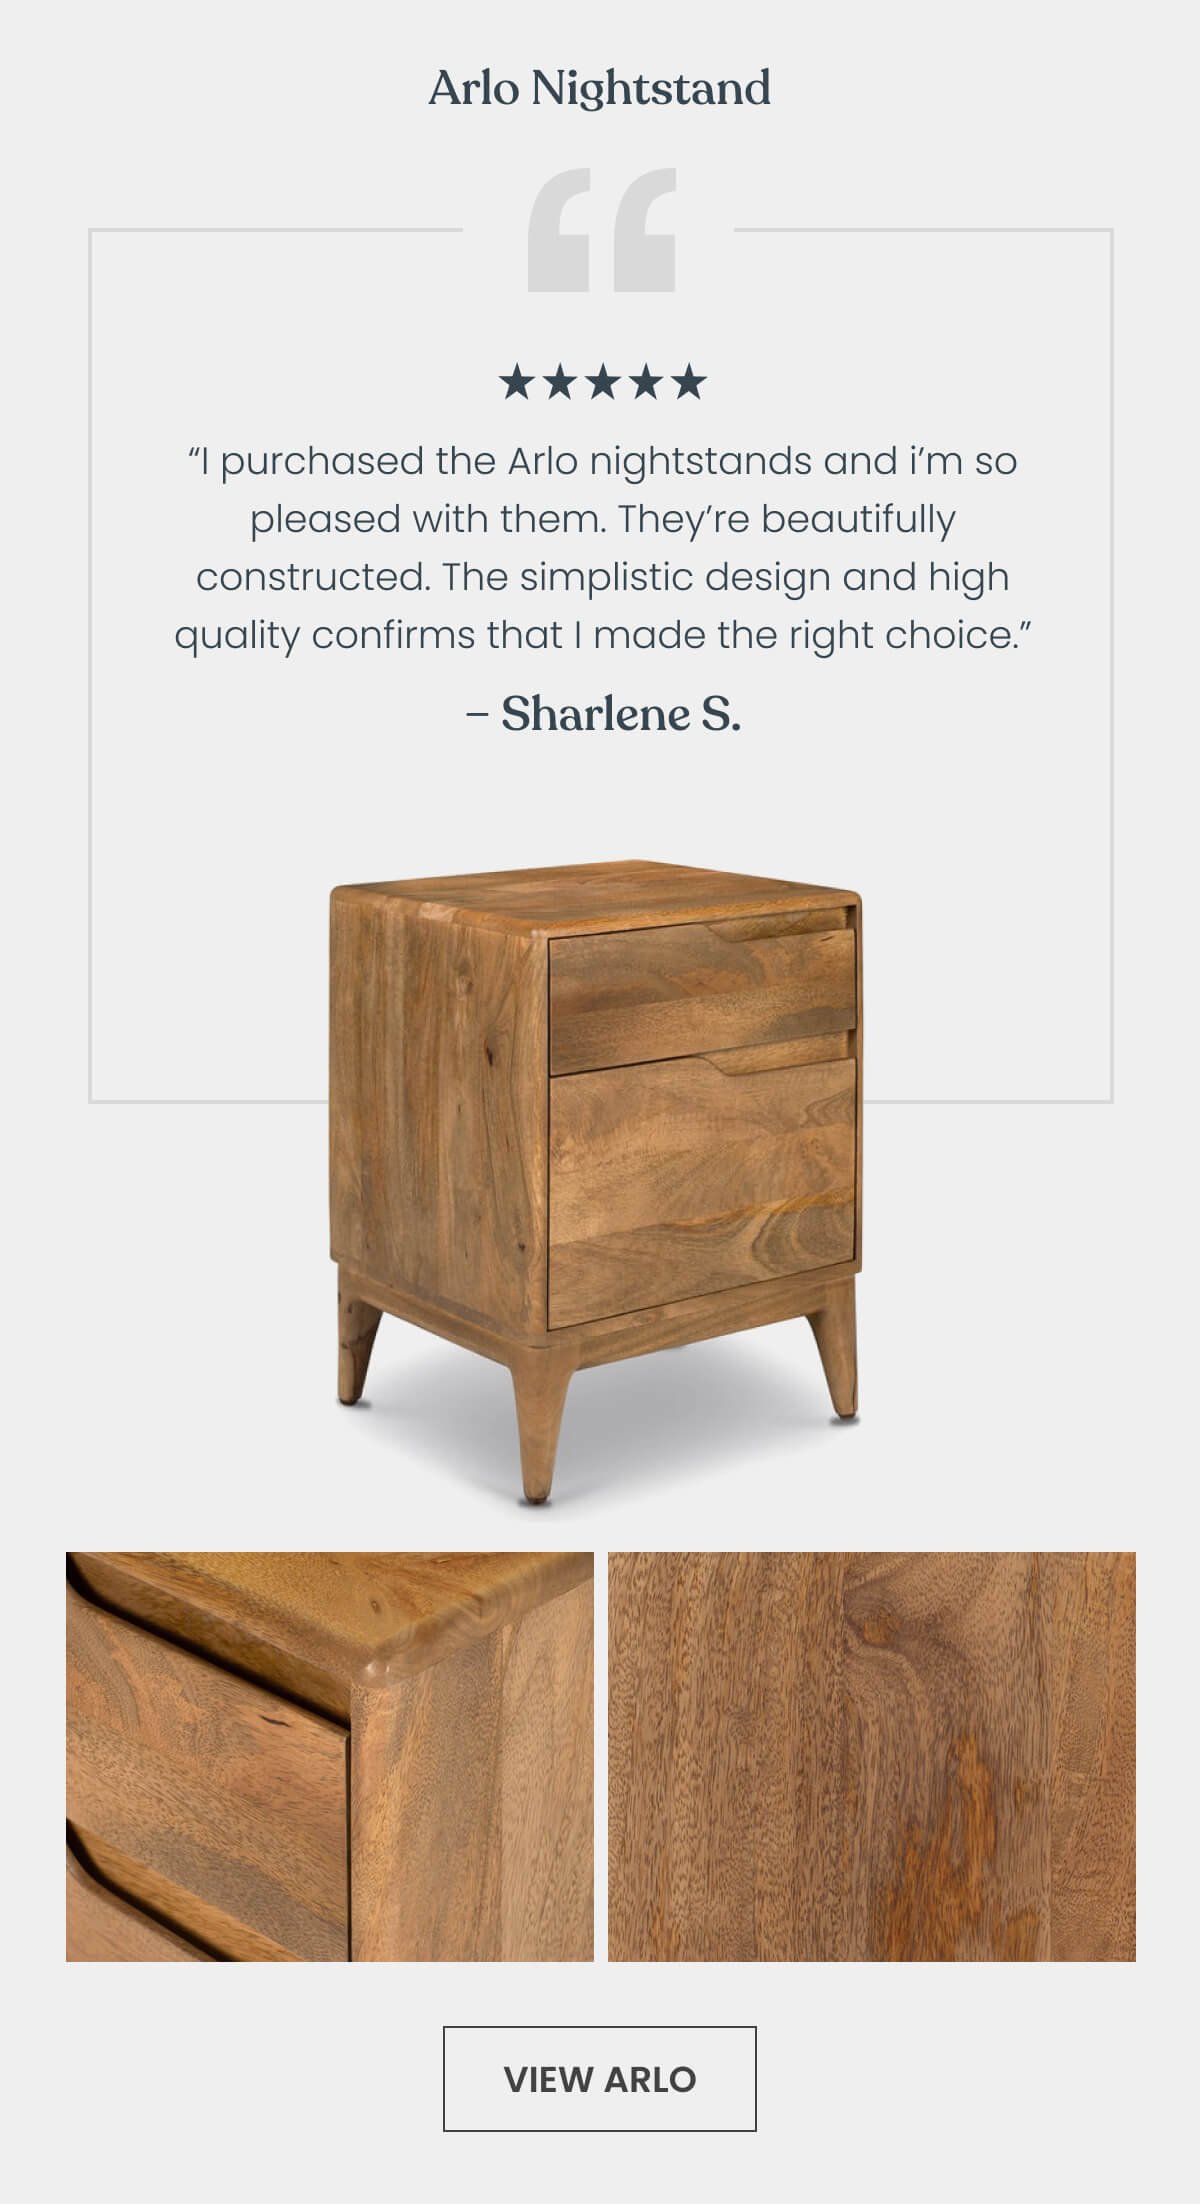 Arlo Nightstand “I purchased the Arlo nightstands and am so pleased with them. They’re beautifully constructed. The simplistic design and high quality confirms that I made the right choice every time I look at them.” - Sharlene S ⭐⭐⭐⭐⭐